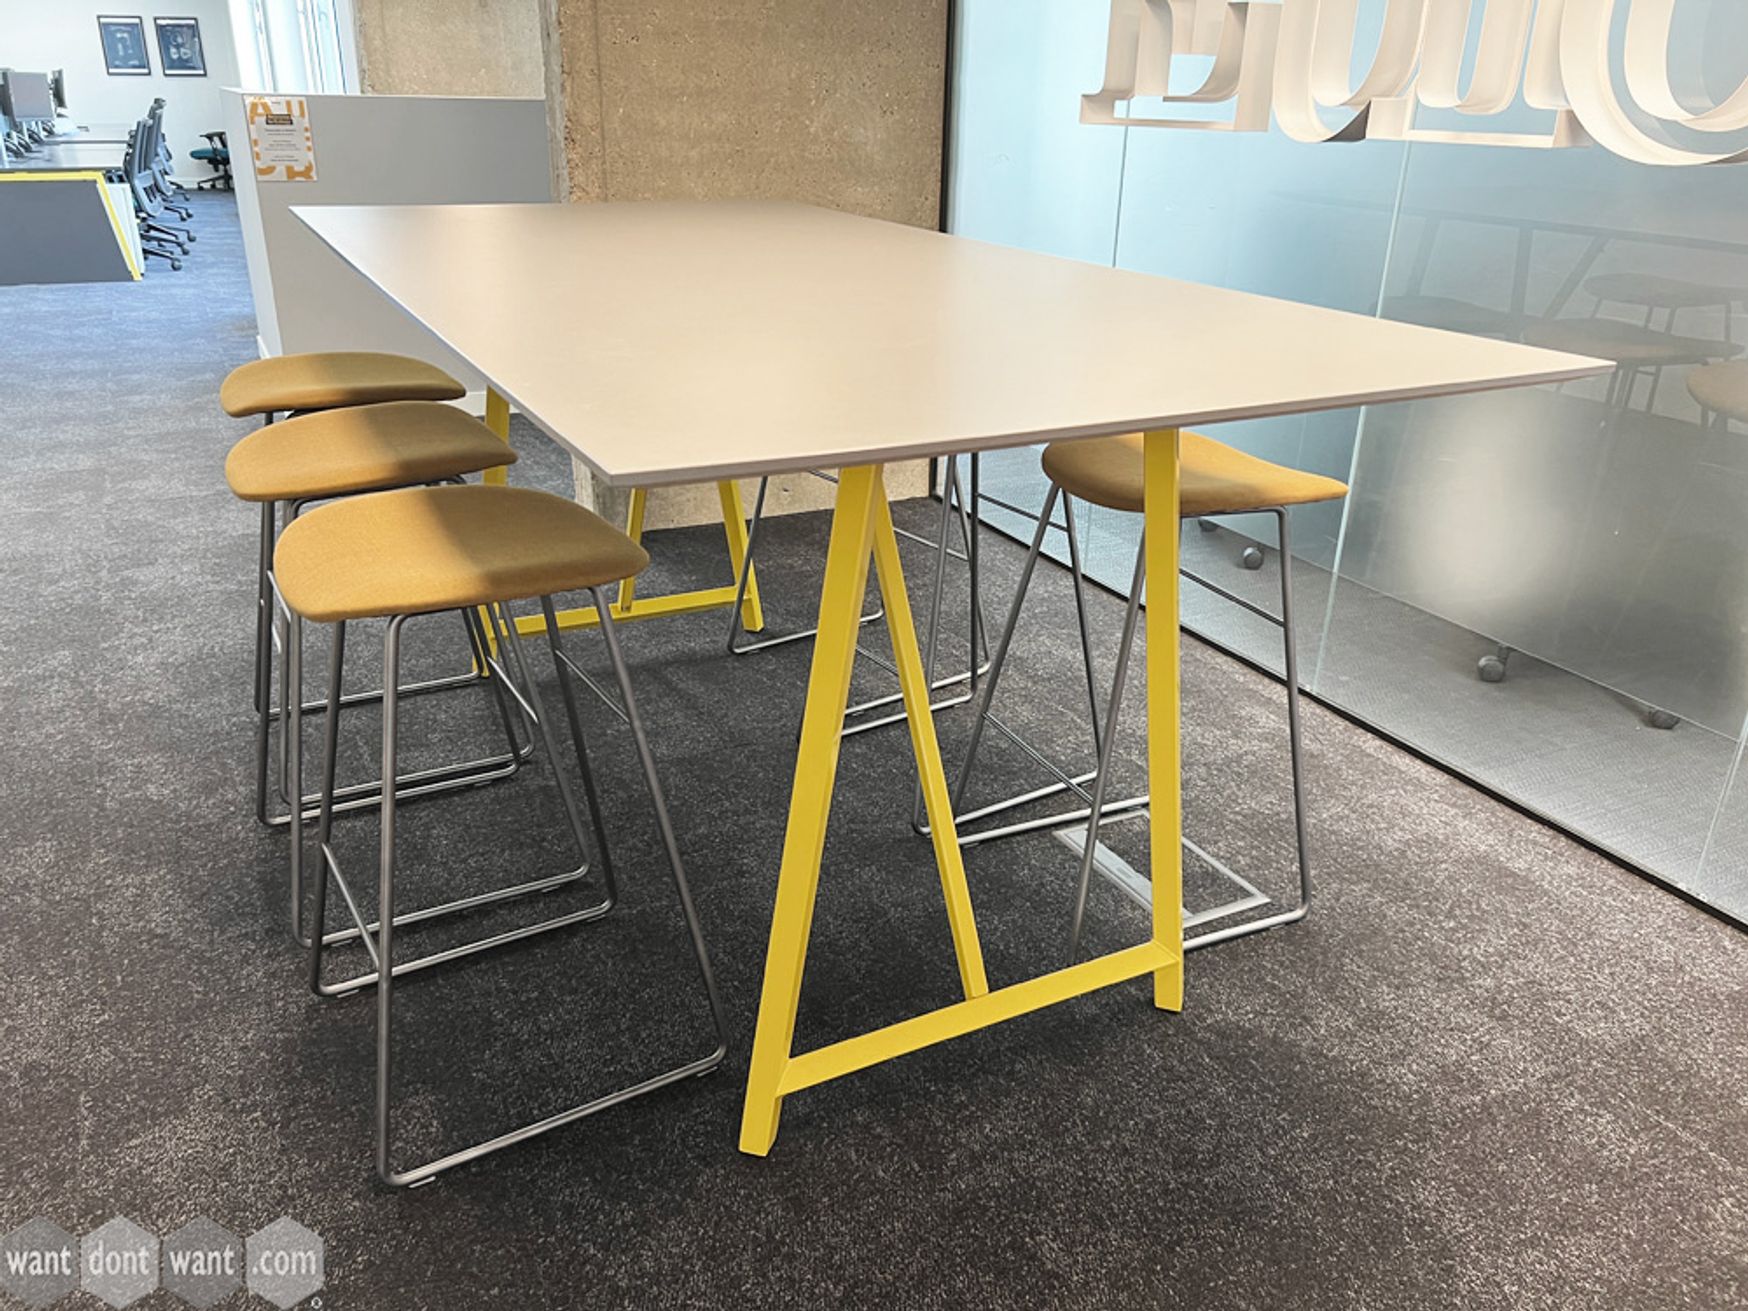 Used high meeting table with light grey top and yellow metal legs.